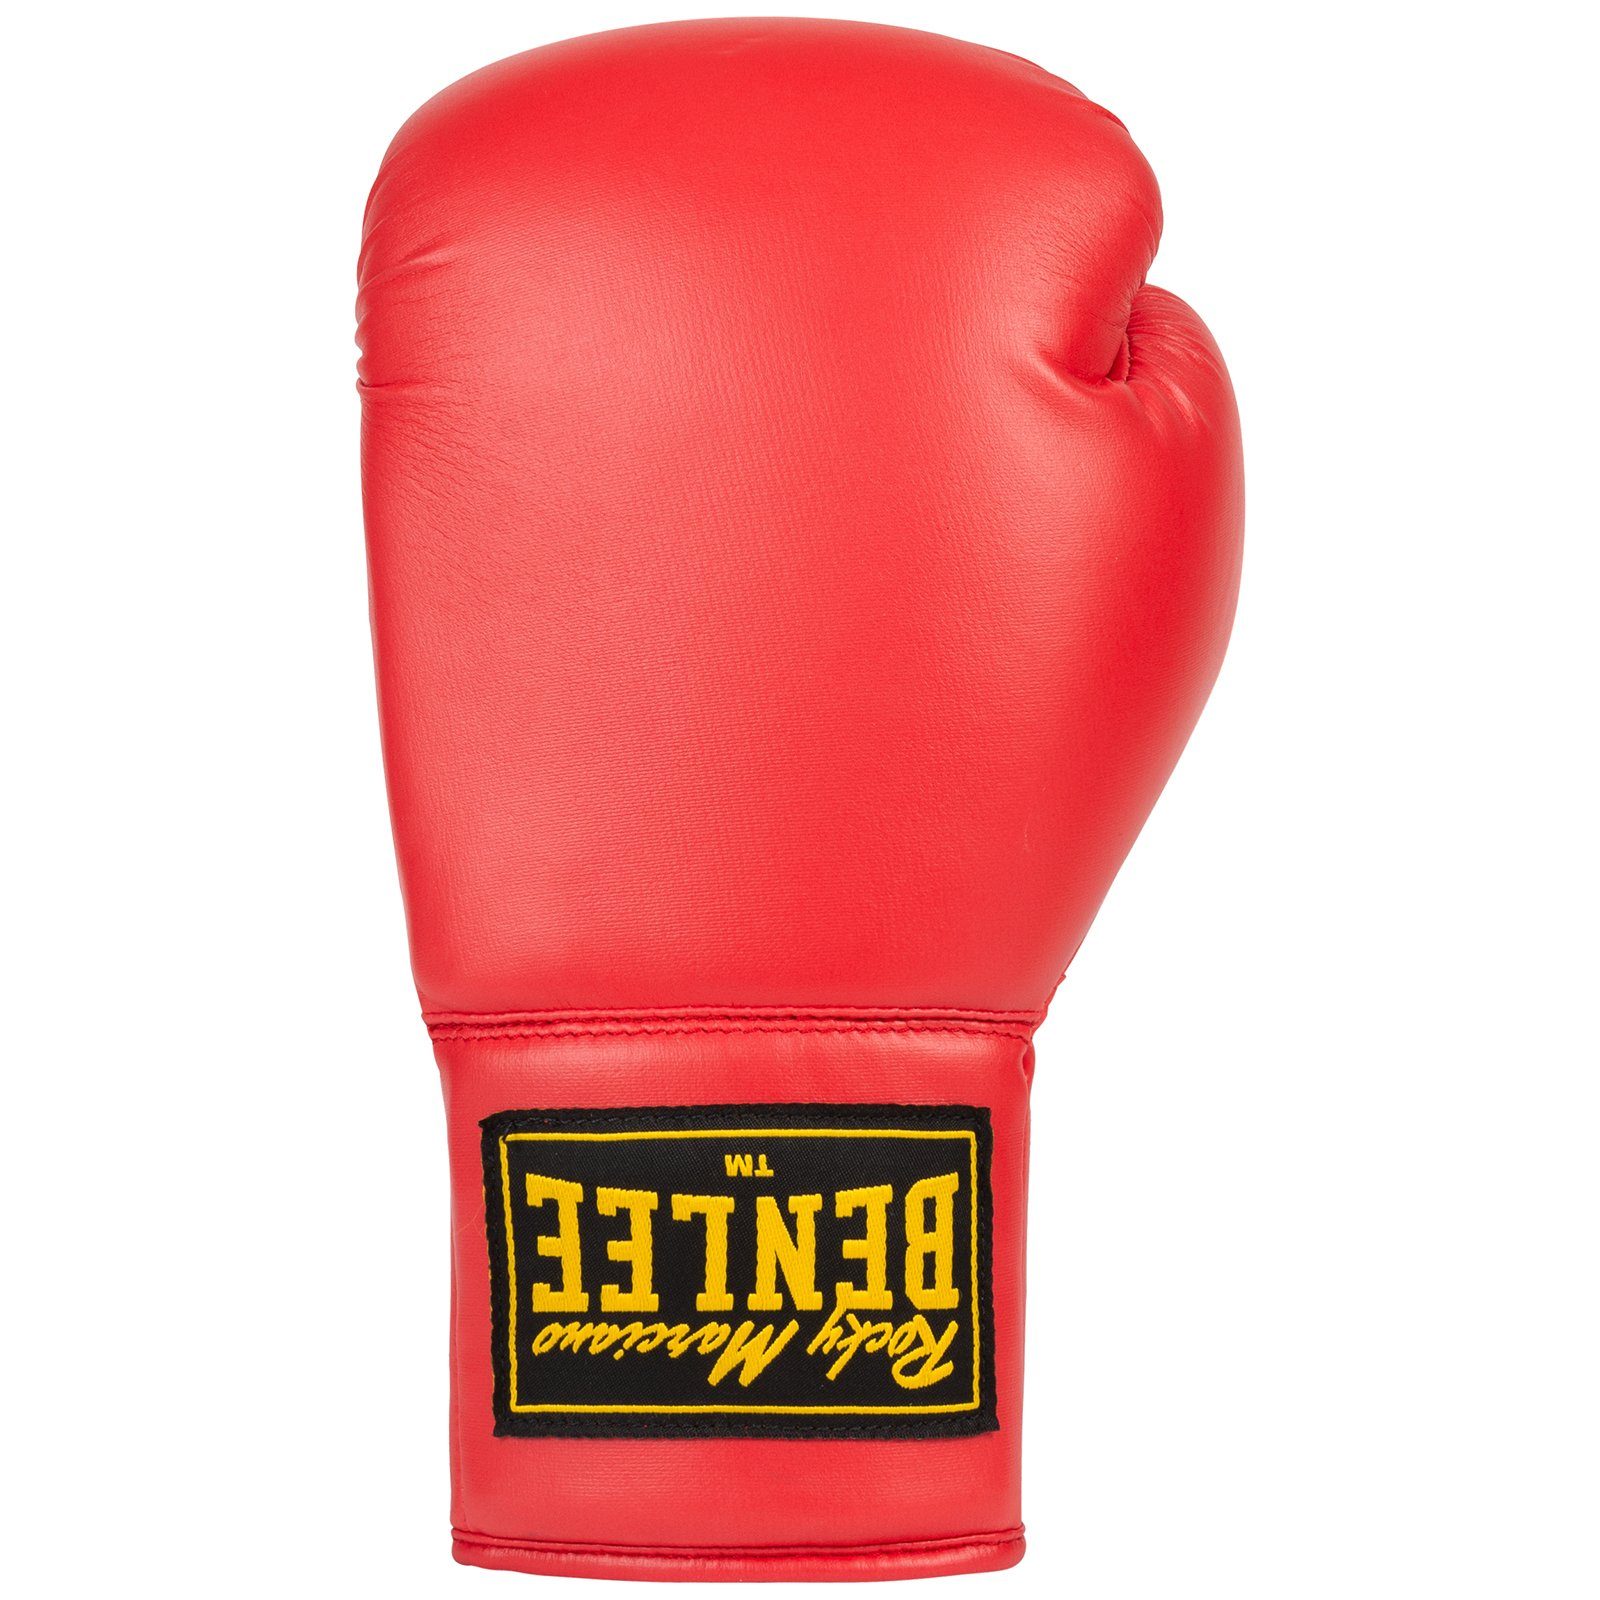 Benlee Rocky Marciano Boxhandschuhe GLOVES Red AUTOGRAPH